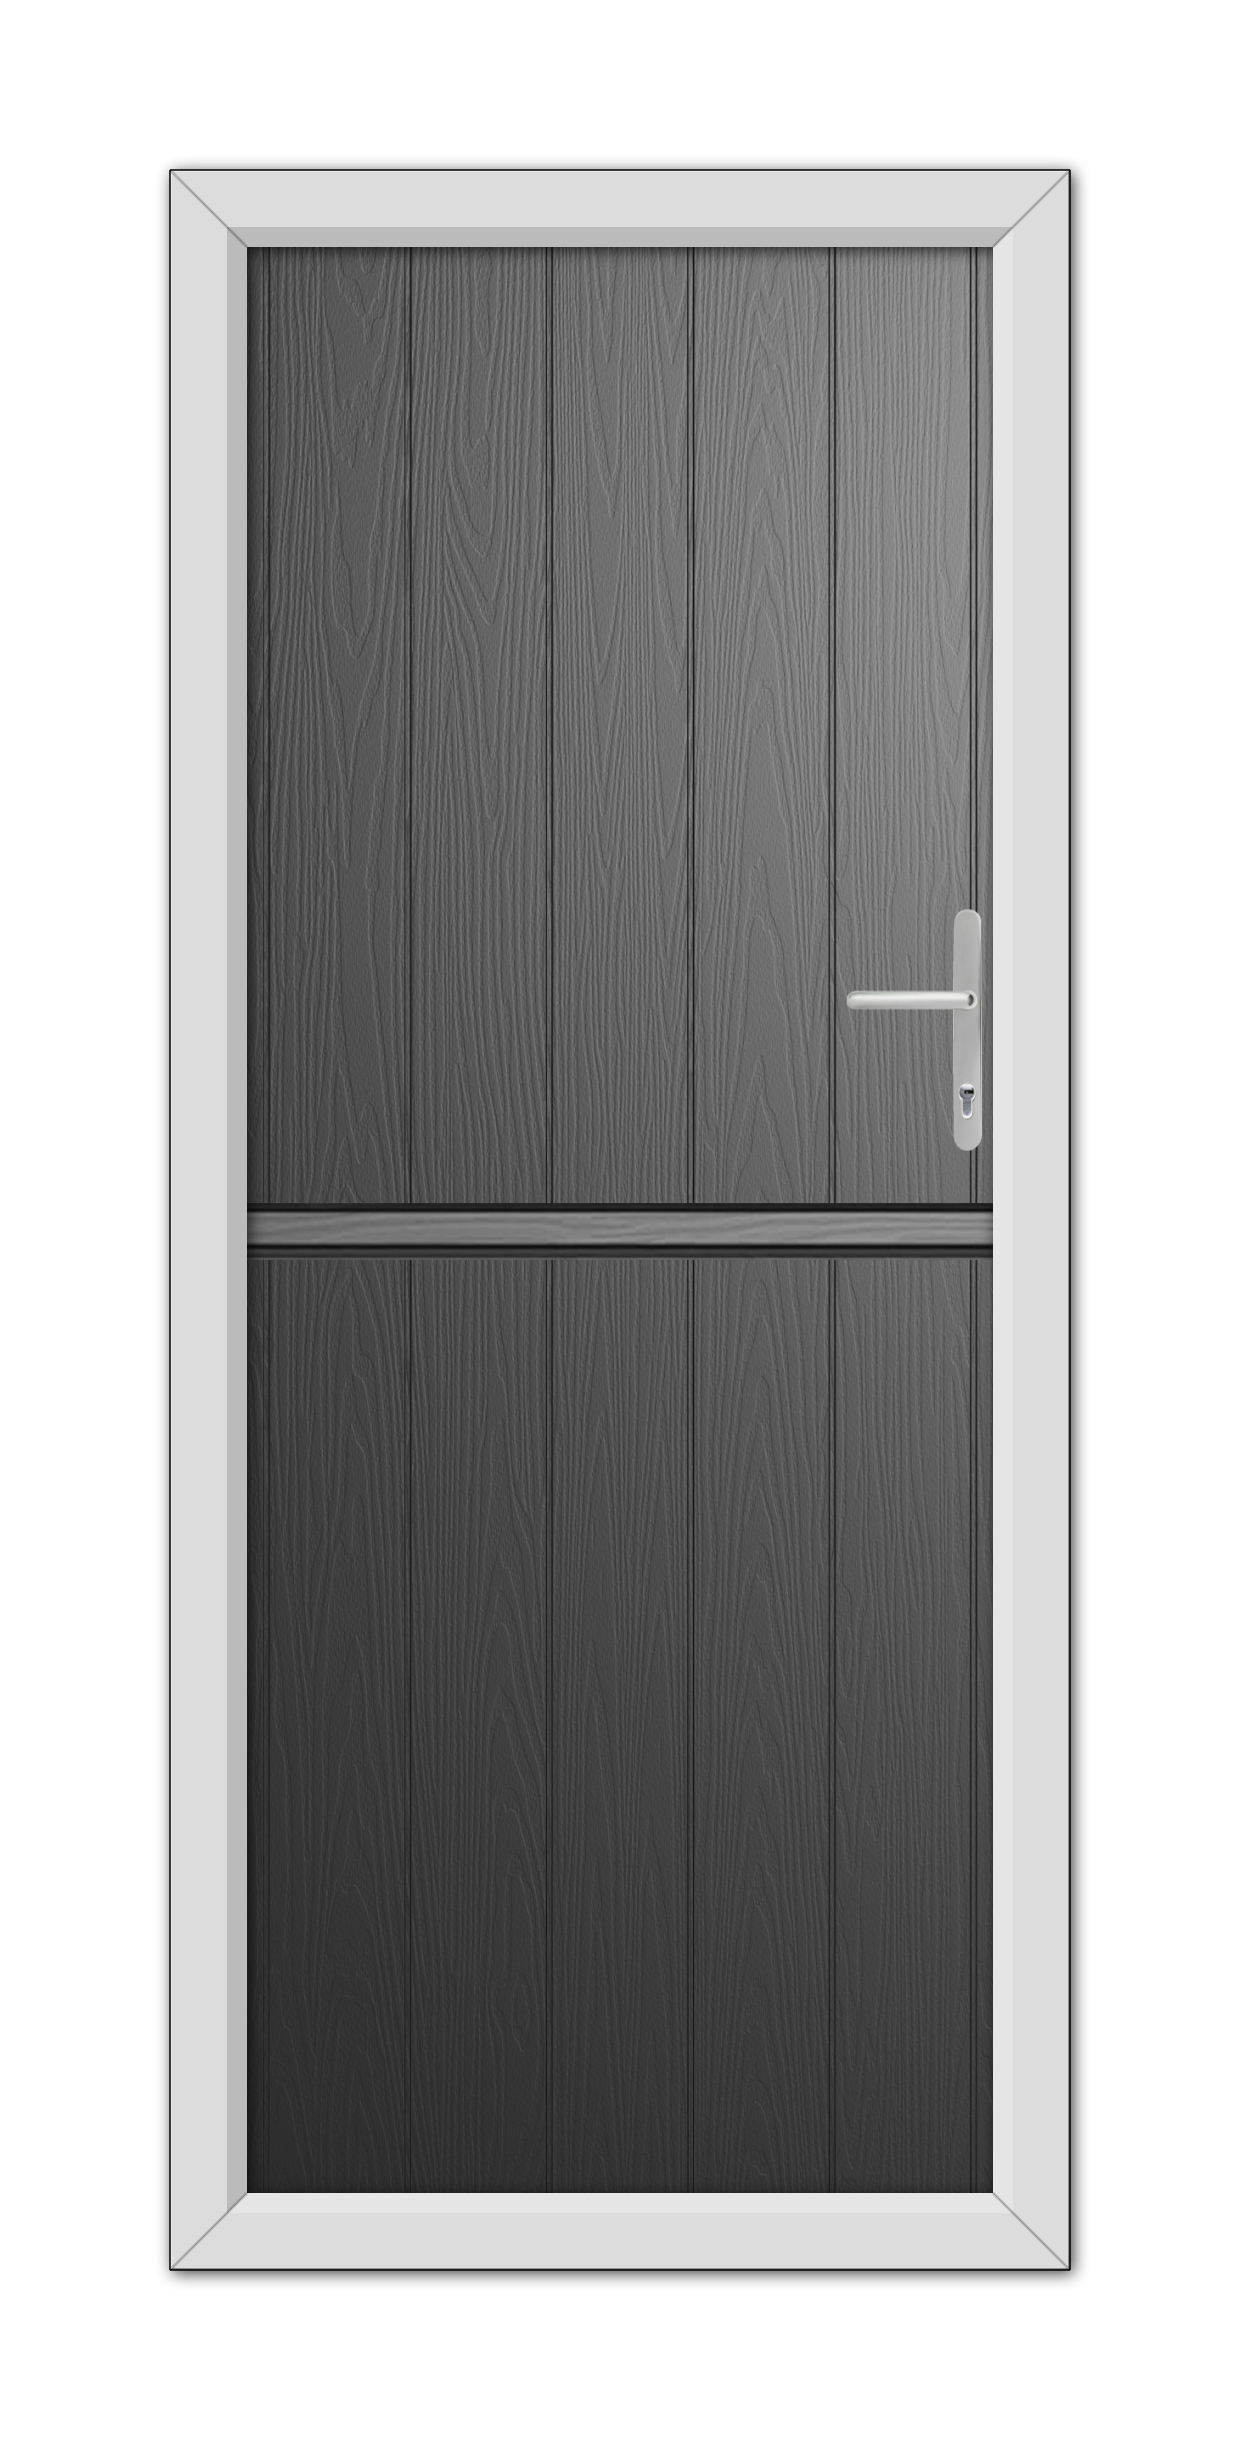 A modern Black Norfolk Solid Stable Composite Door 48mm Timber Core with a horizontal panel, a white frame, and a metallic door handle, set against a plain background.